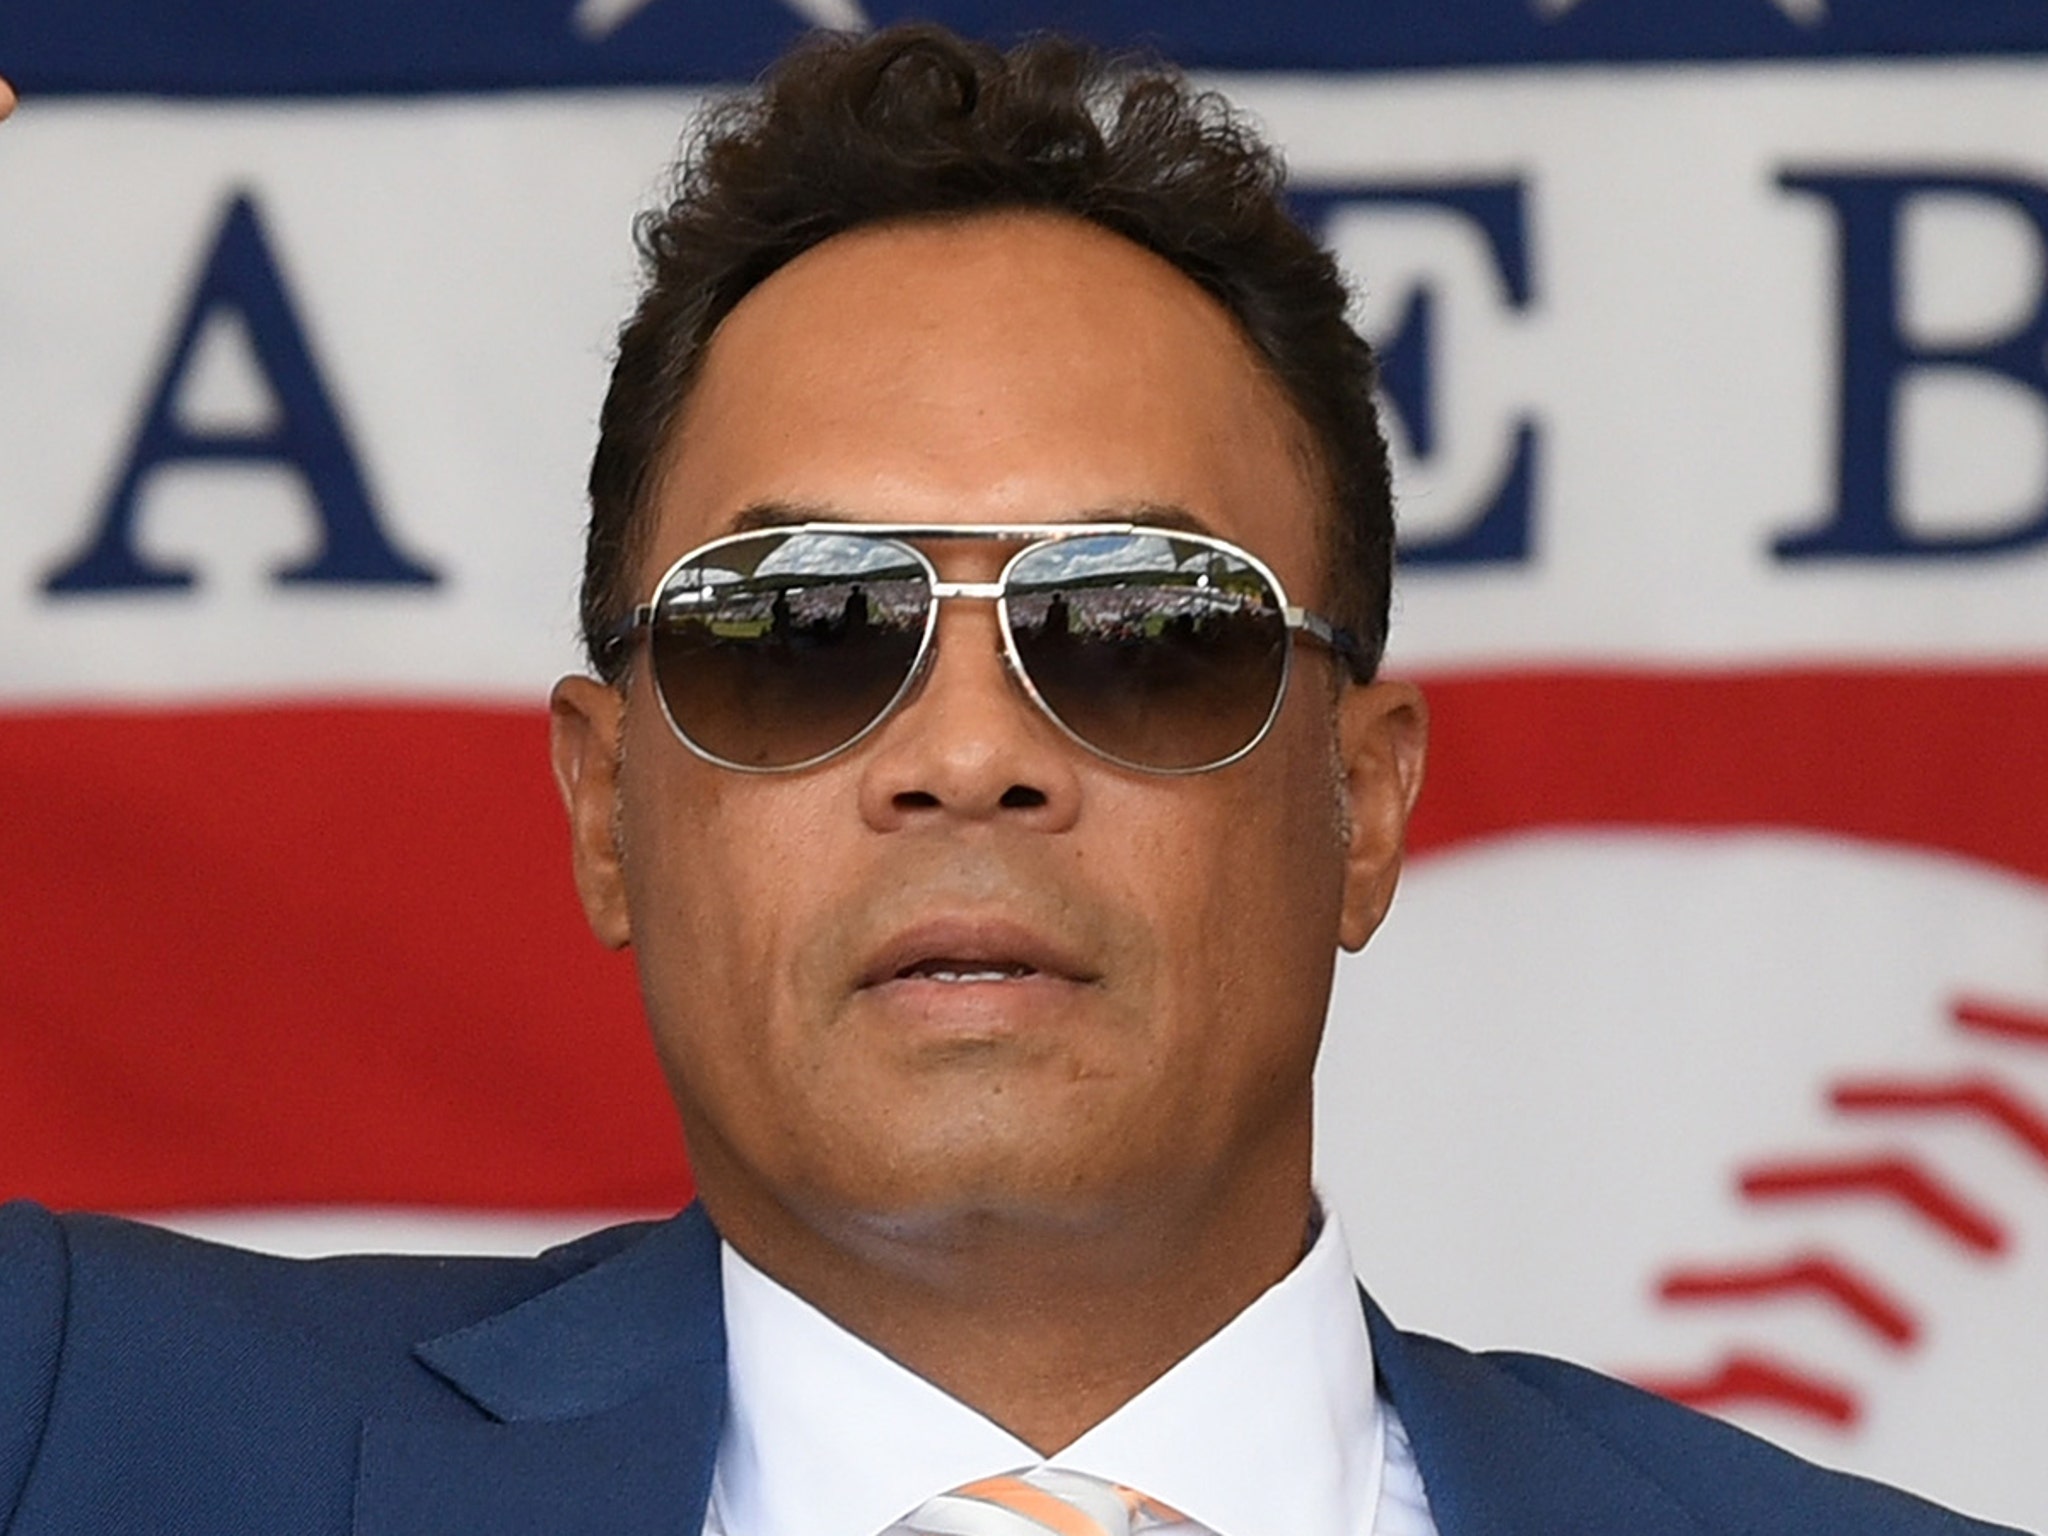 Roberto Alomar sued by ex-girlfriend for 'reckless' unprotected